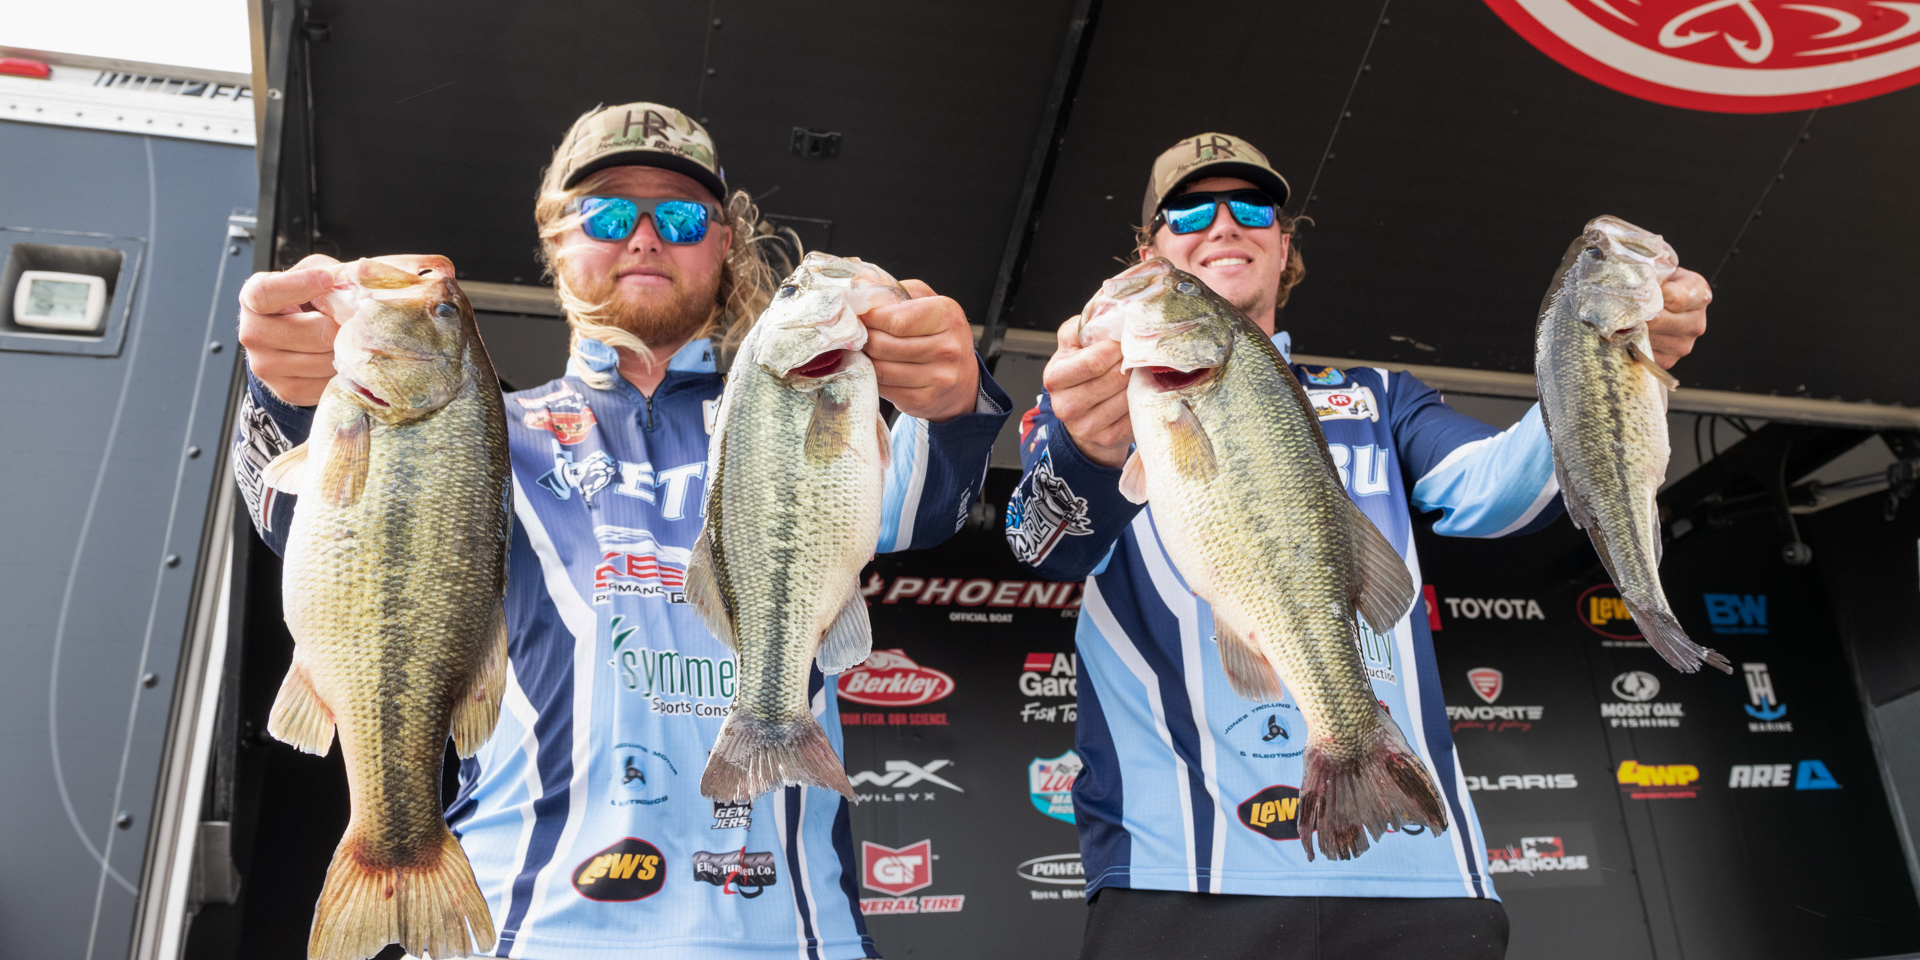 ETBU Leads by an Ounce After Day 1 at Fort Gibson - Major League Fishing